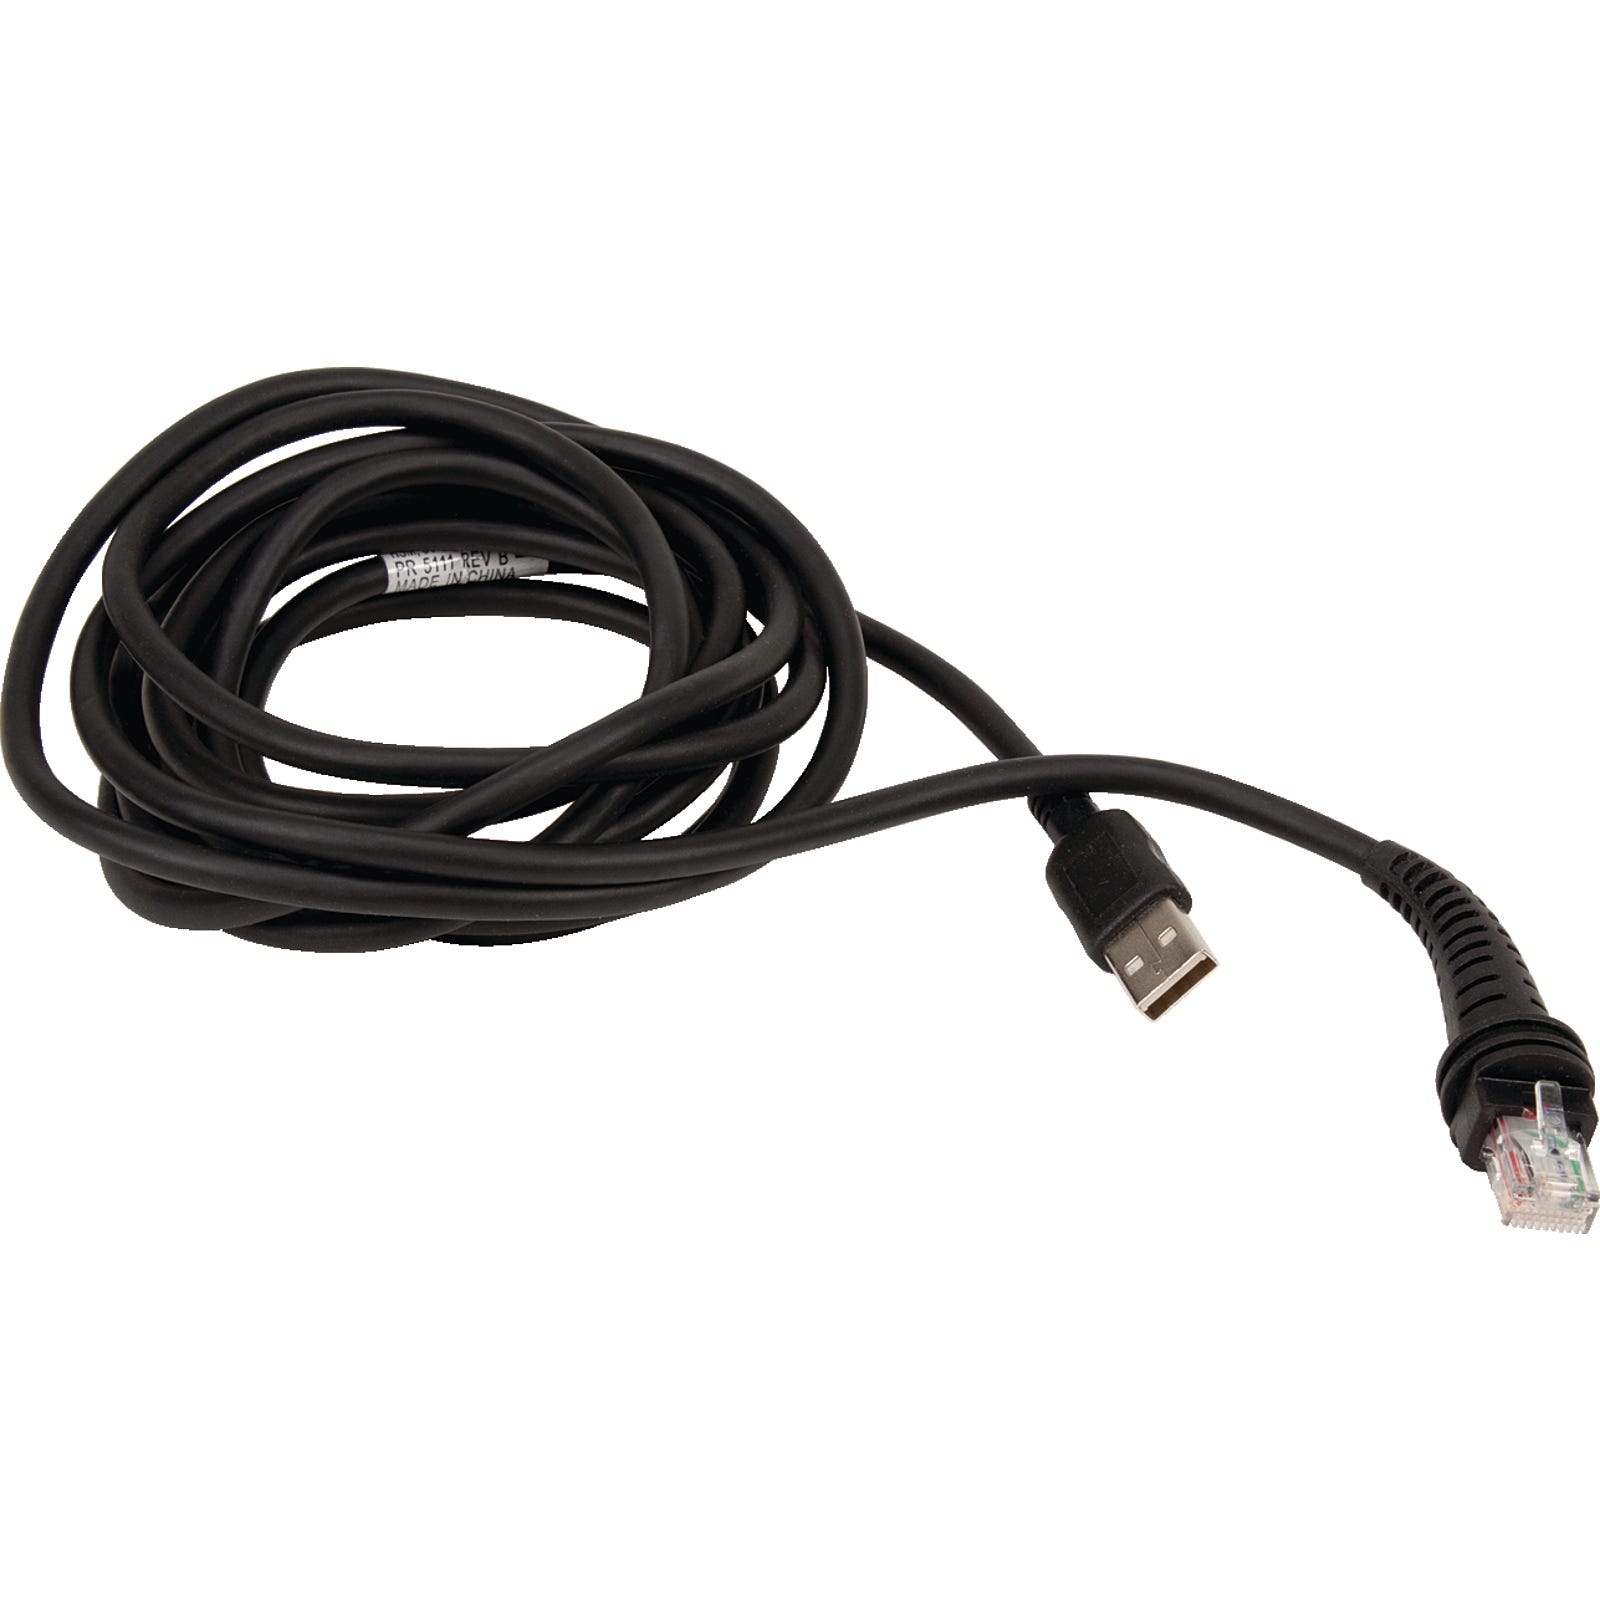 1300G USB Replacement Cable